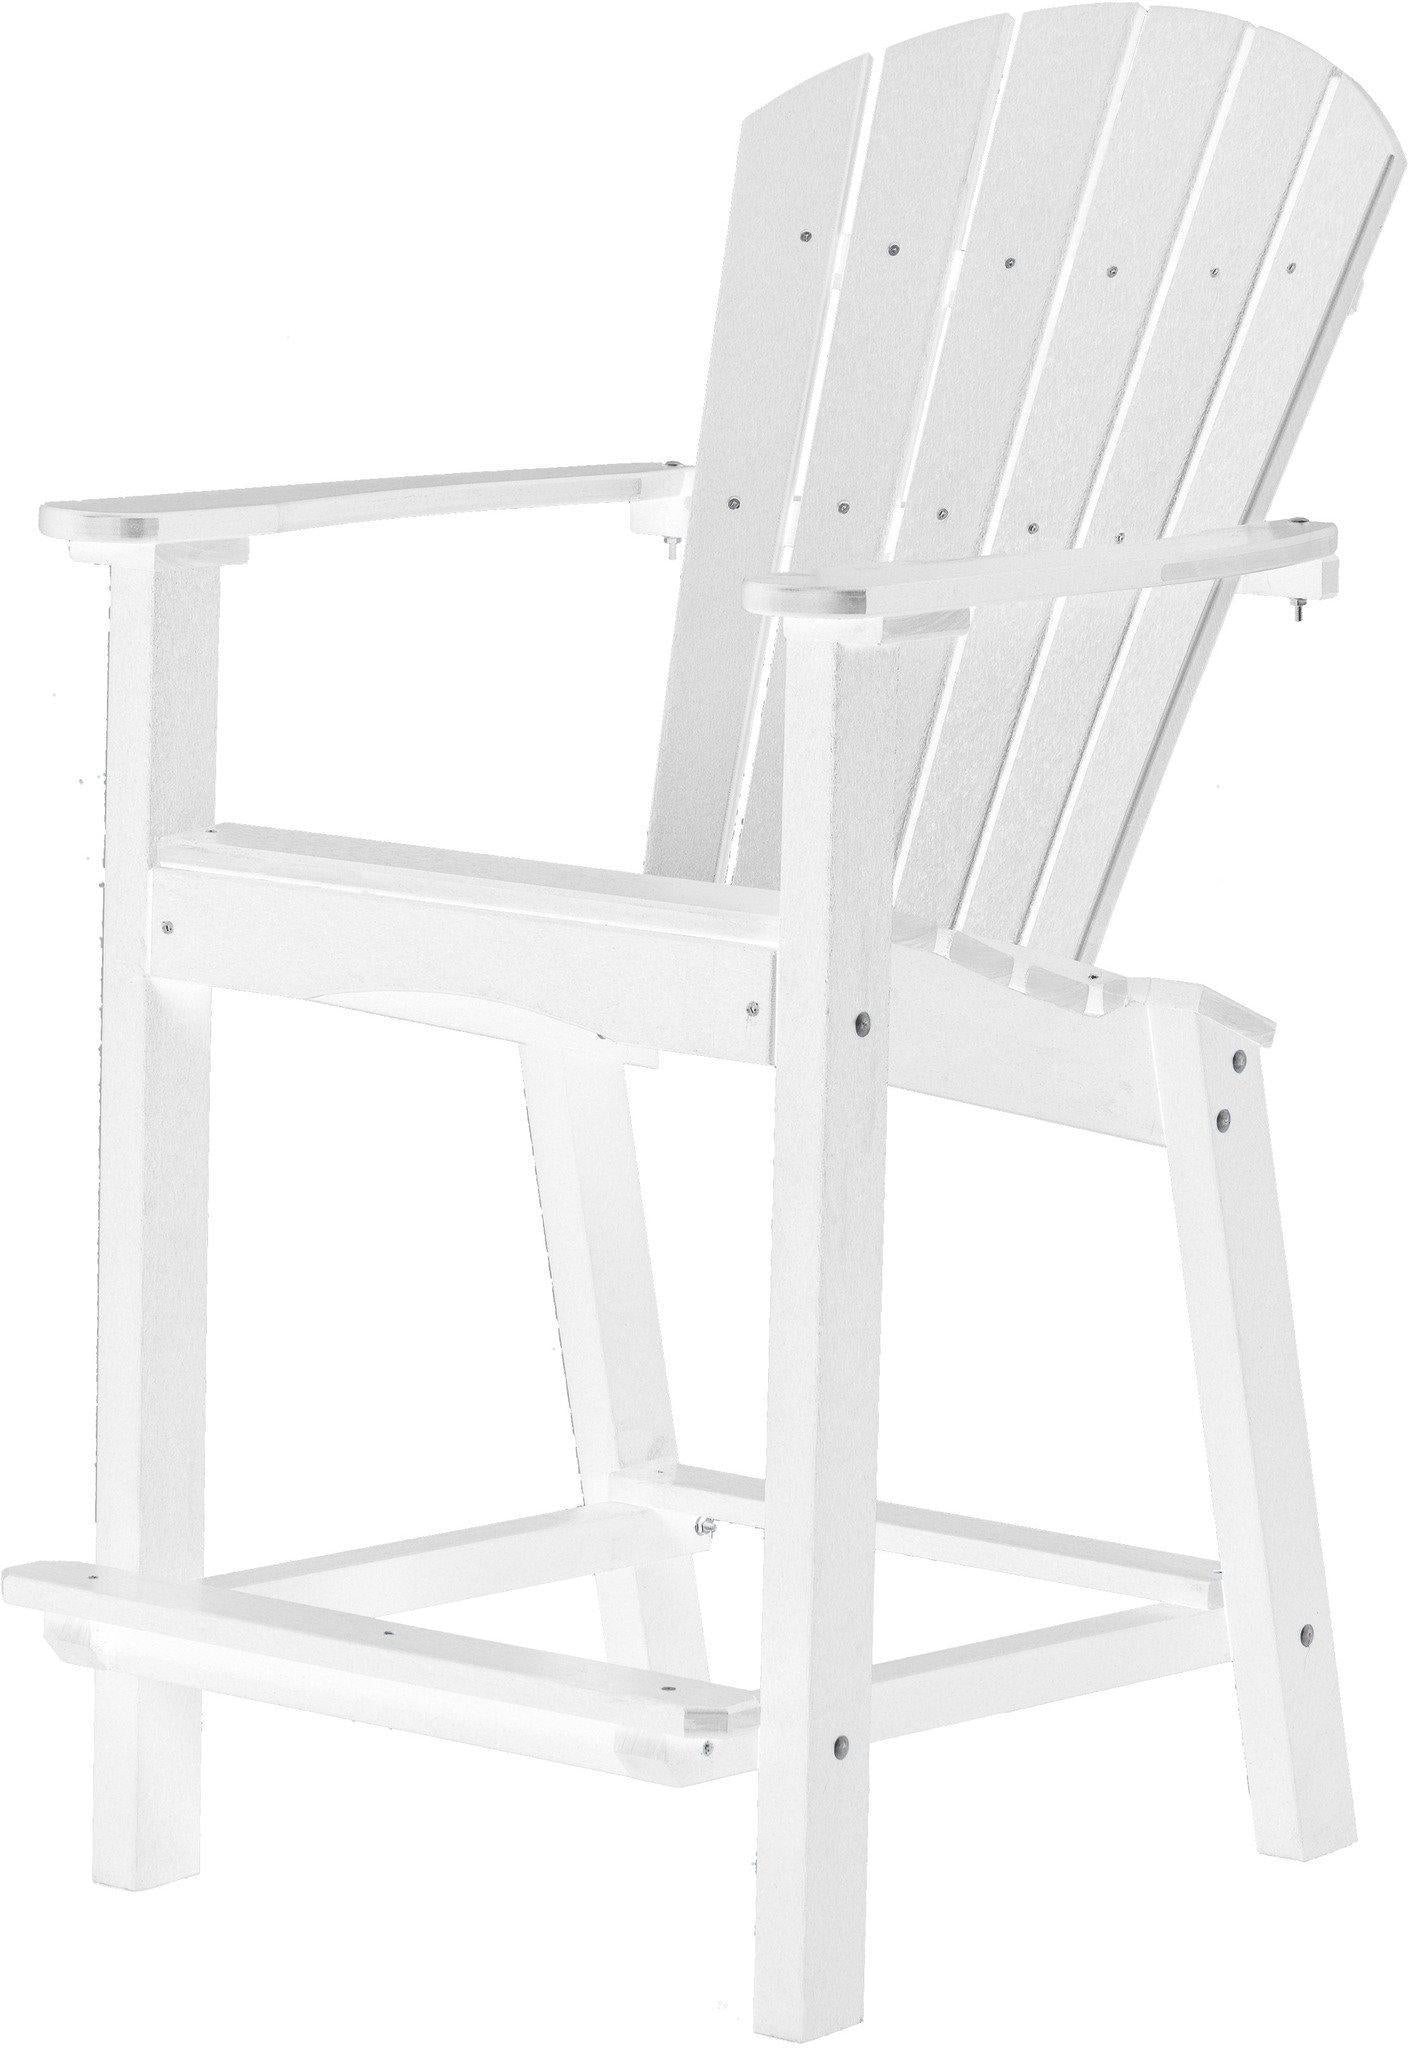 Wildridge Recycled Plastic Outdoor Classic 30” High Dining Chair - LEAD TIME TO SHIP 6 WEEKS OR LESS